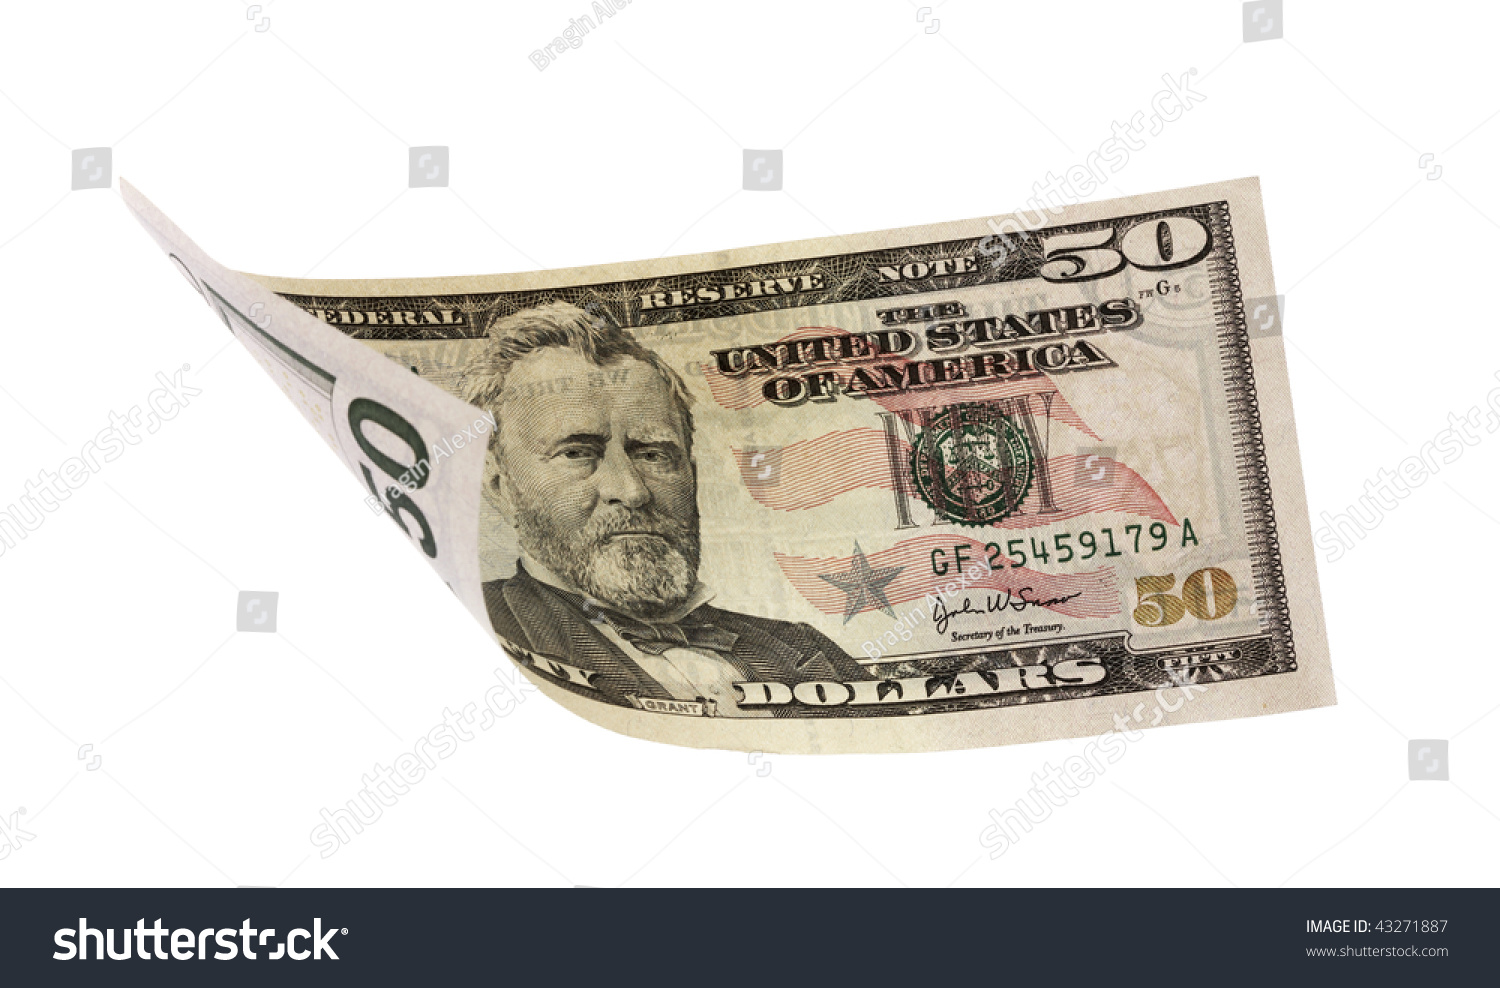 50 Dollar Banknote ,Isolated On A White Background Stock Photo 43271887 ...